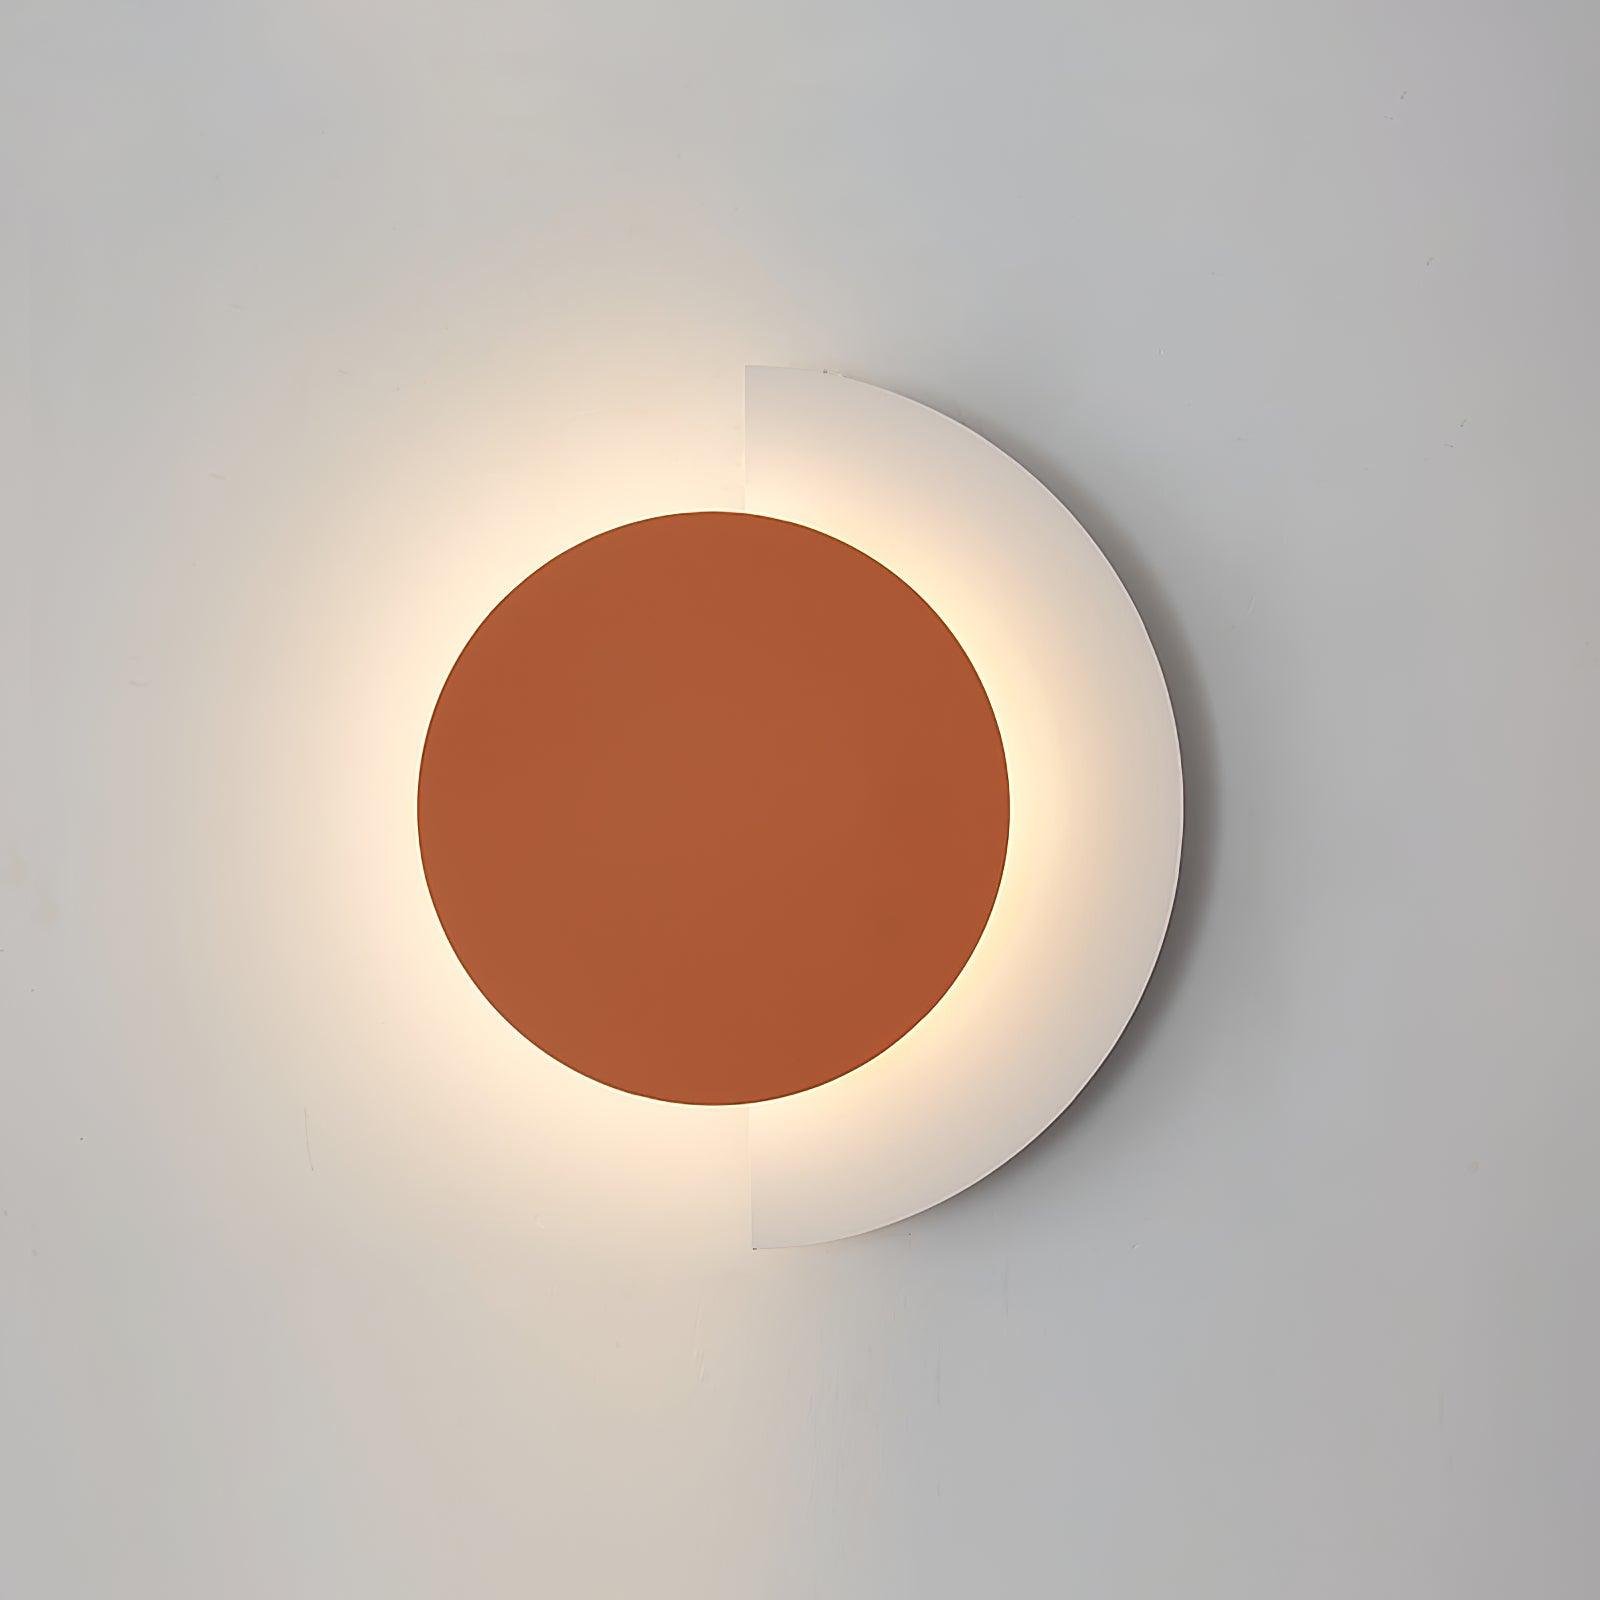 Rounded Abstract Art Sconces Set, Orange and White, Cool Light, Size: ∅ 23″ x H 25.6″, Pack of 2.